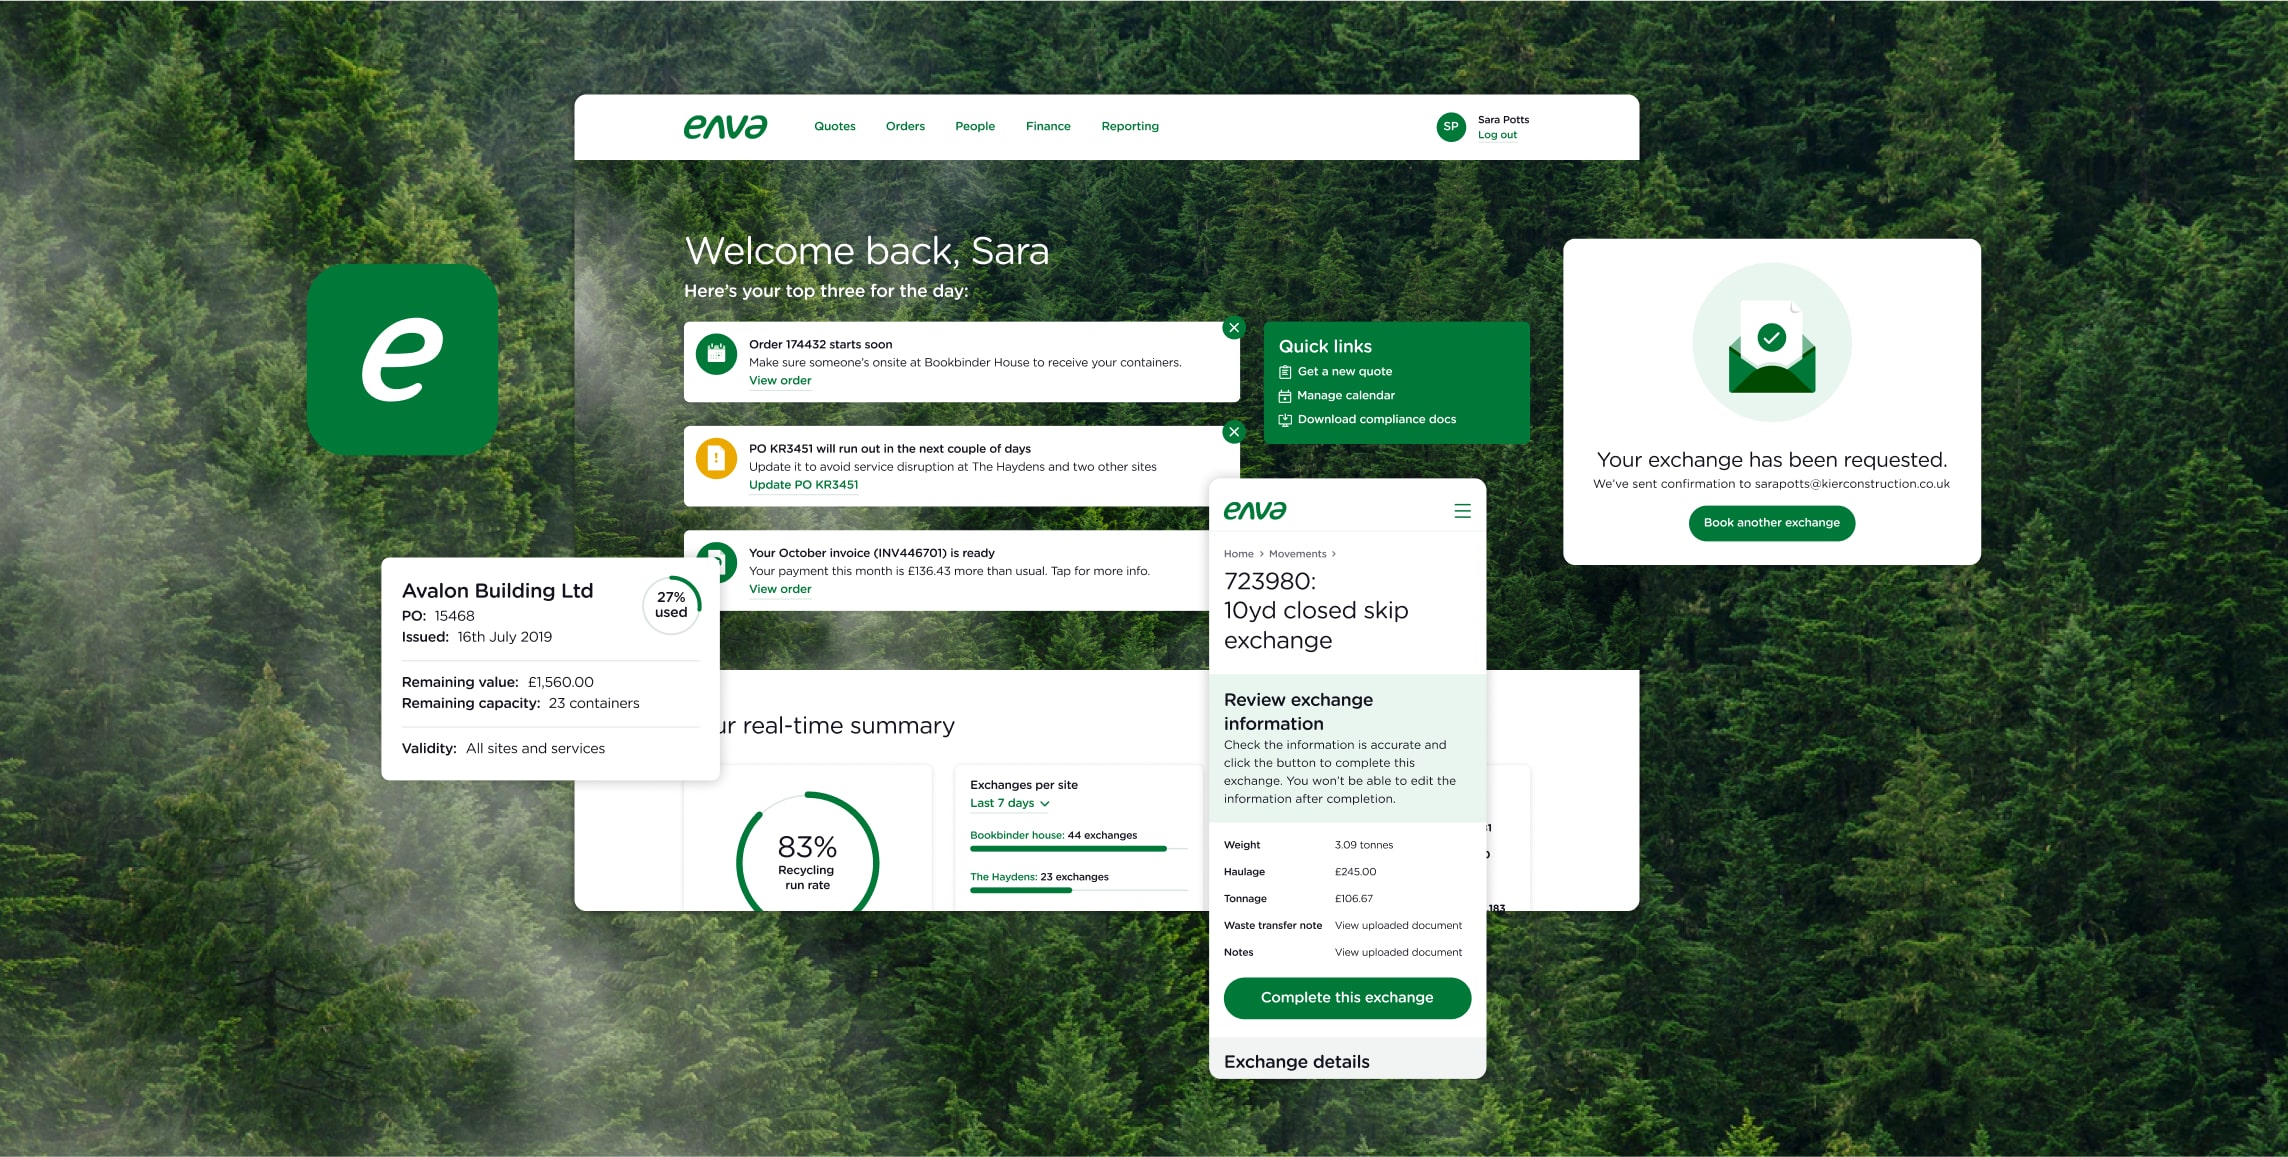 Various elements from the MyEnva webapp against a background image of a forest.